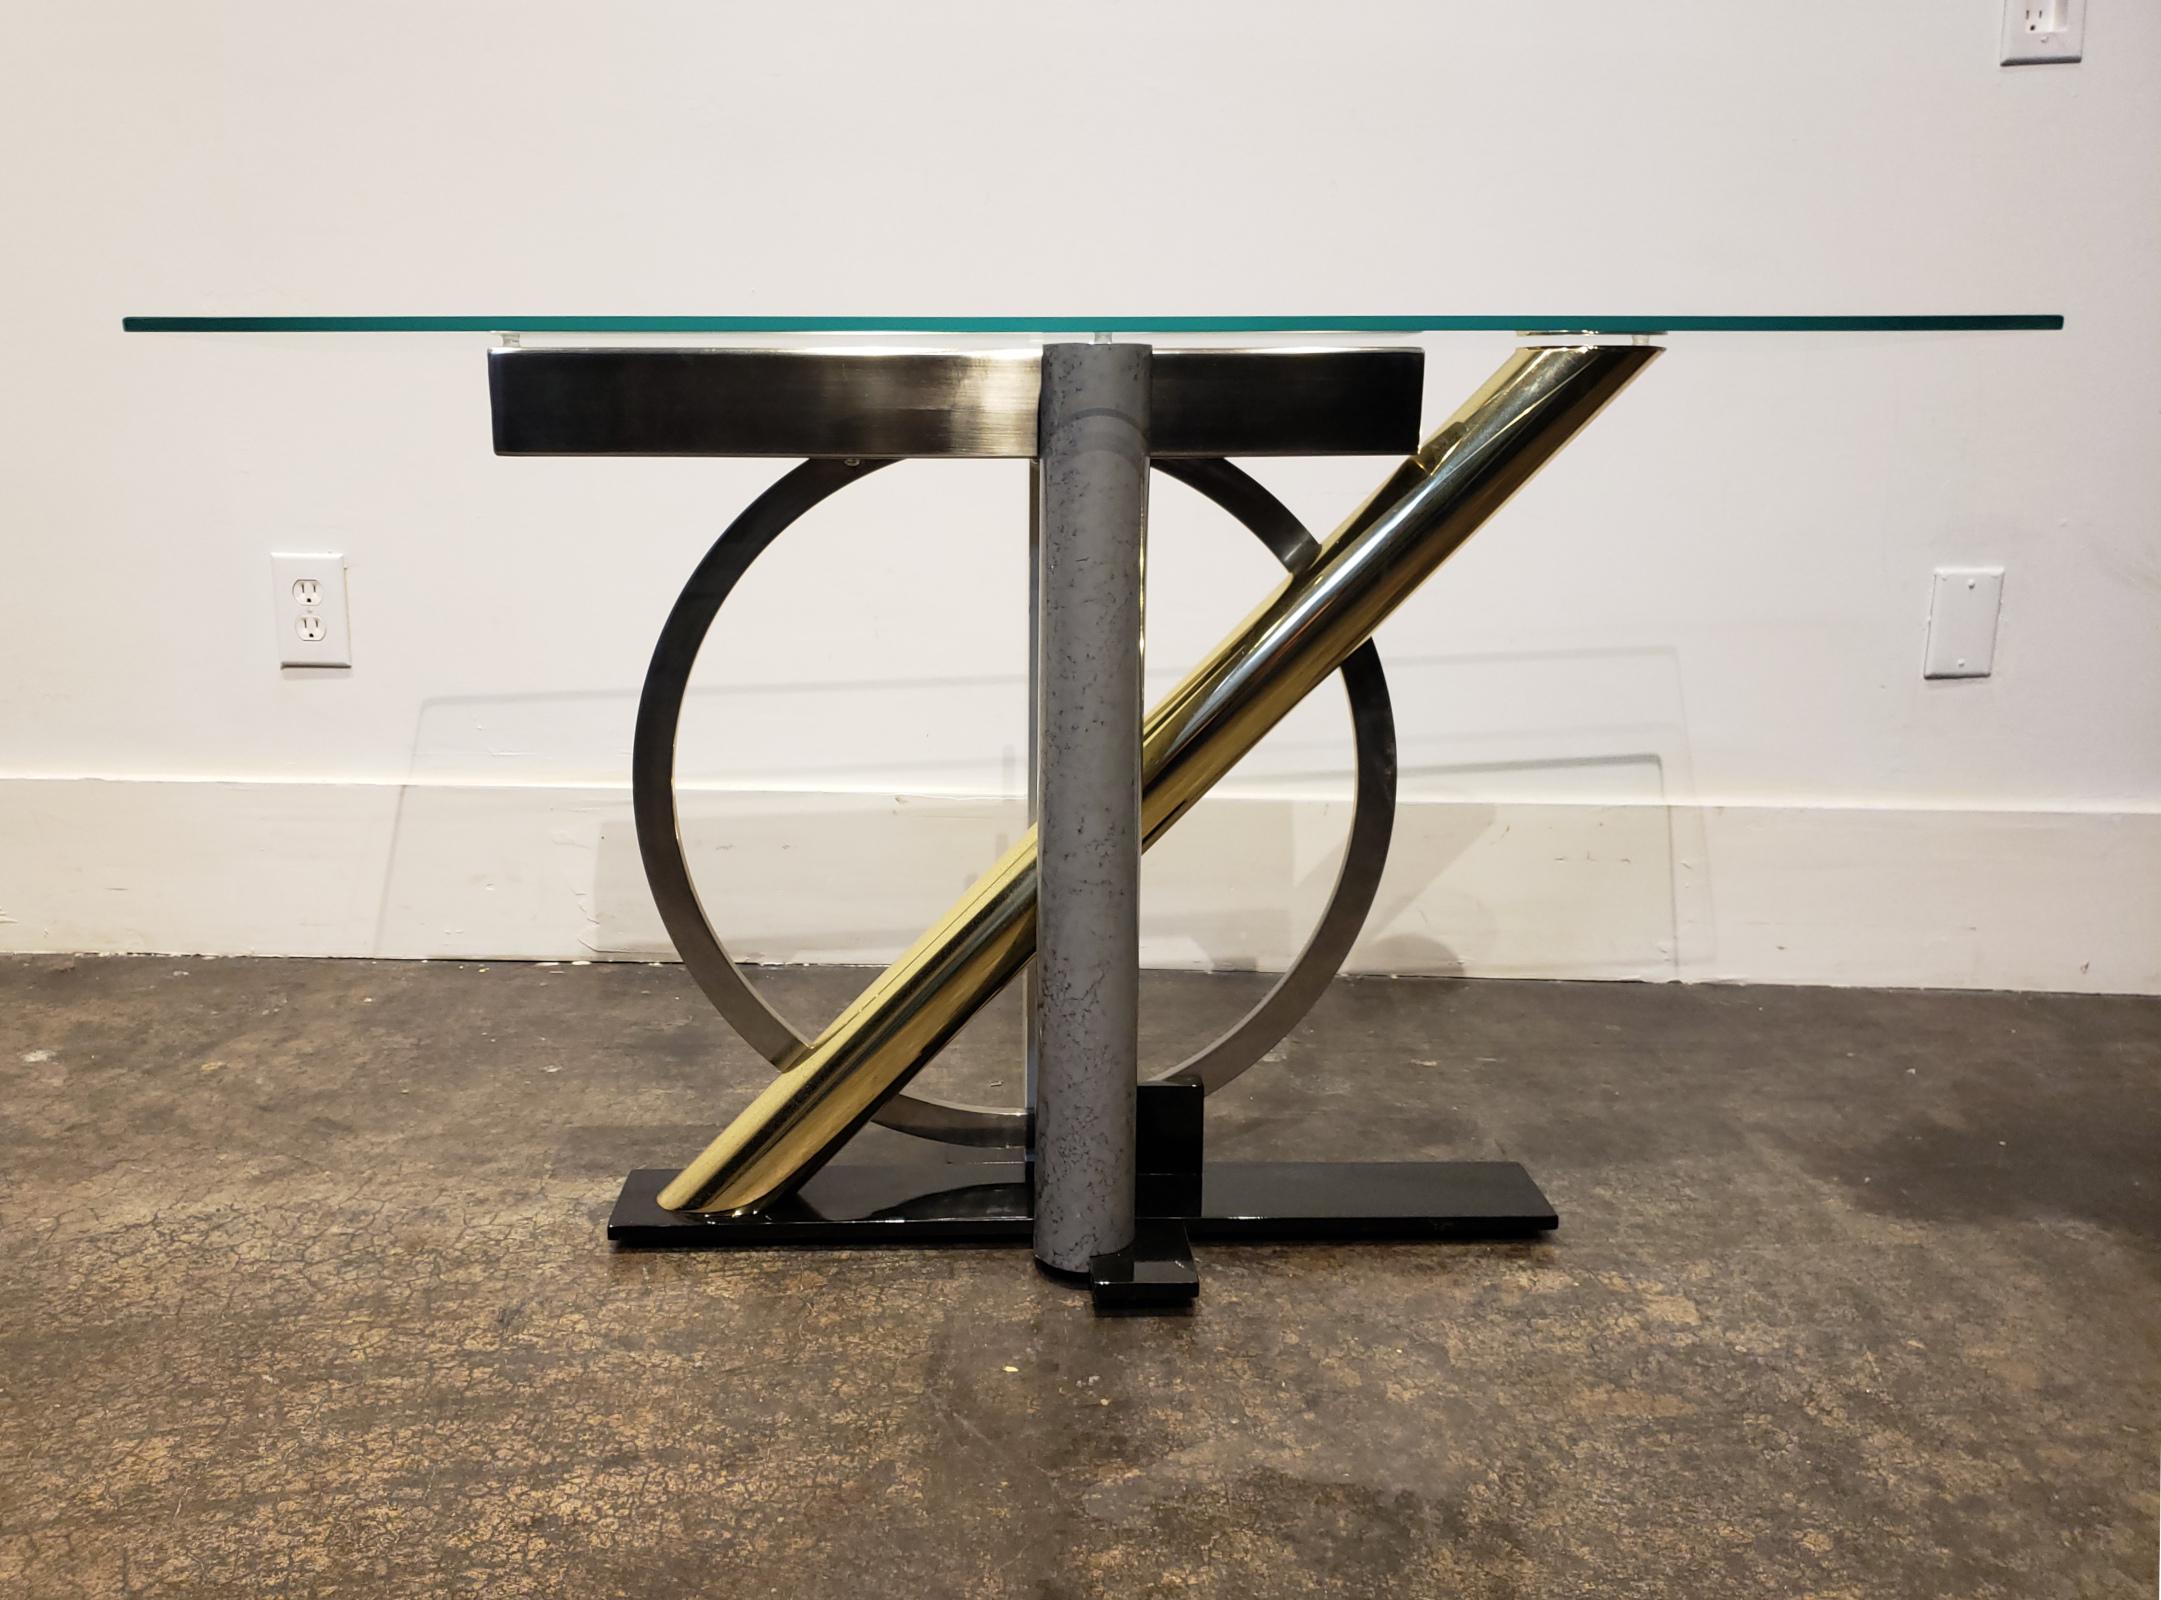 Kaizo Oto for the Design Institute of America enameled steel, chrome and brass Memphis Group-style console table. Beautifully composed mix of black, white and marbled-grey enameled steel and chrome and brass elements. Glass top is 1/2